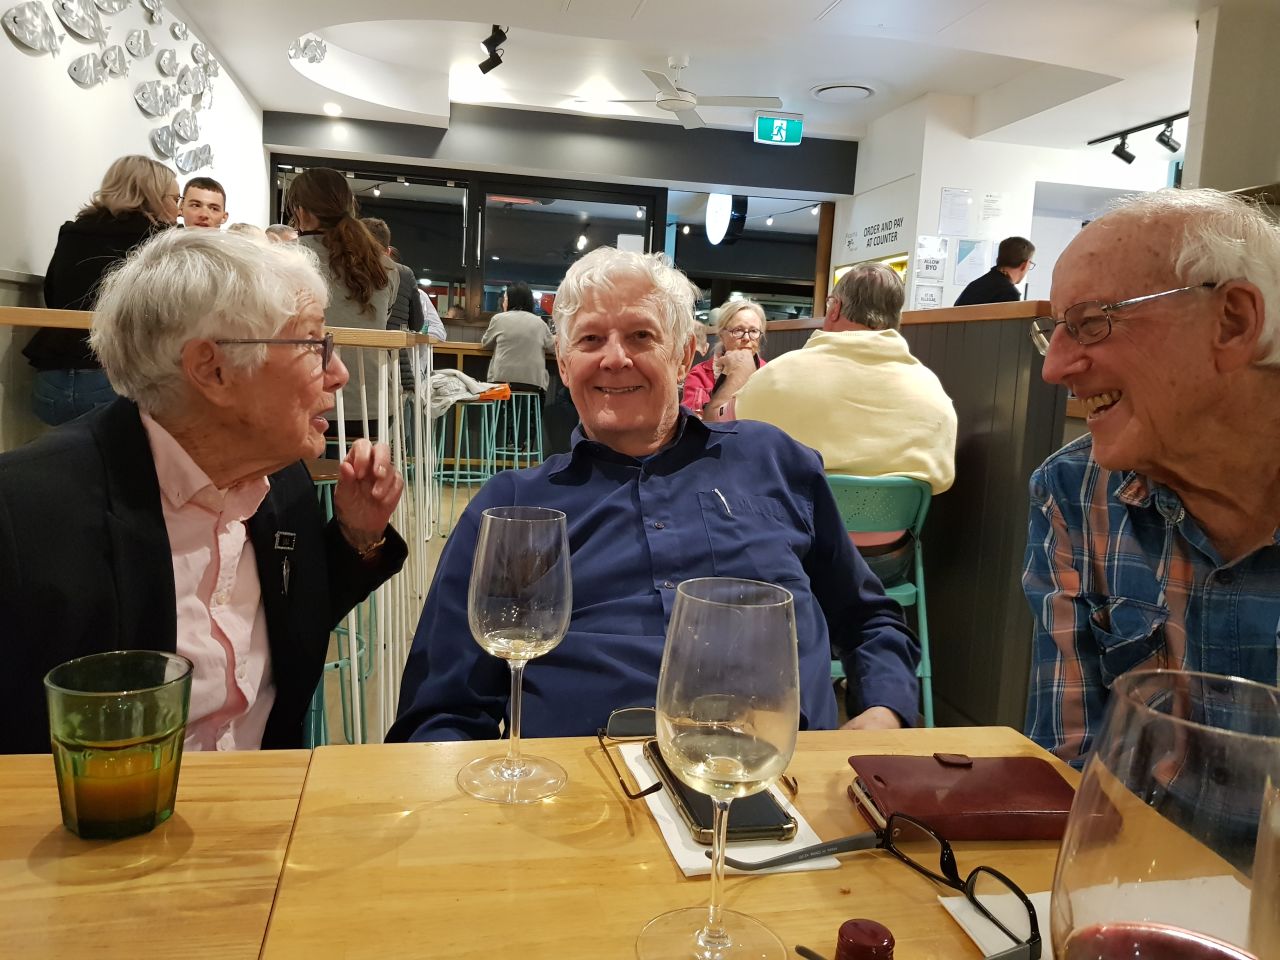 Three is never a crowd when you are having a glass of wine and a good conversation. At our August dinner at Pirahna Fish Caf, New Farm. Great ambiance and delicious food.
Photo: Courtesy Francesca.